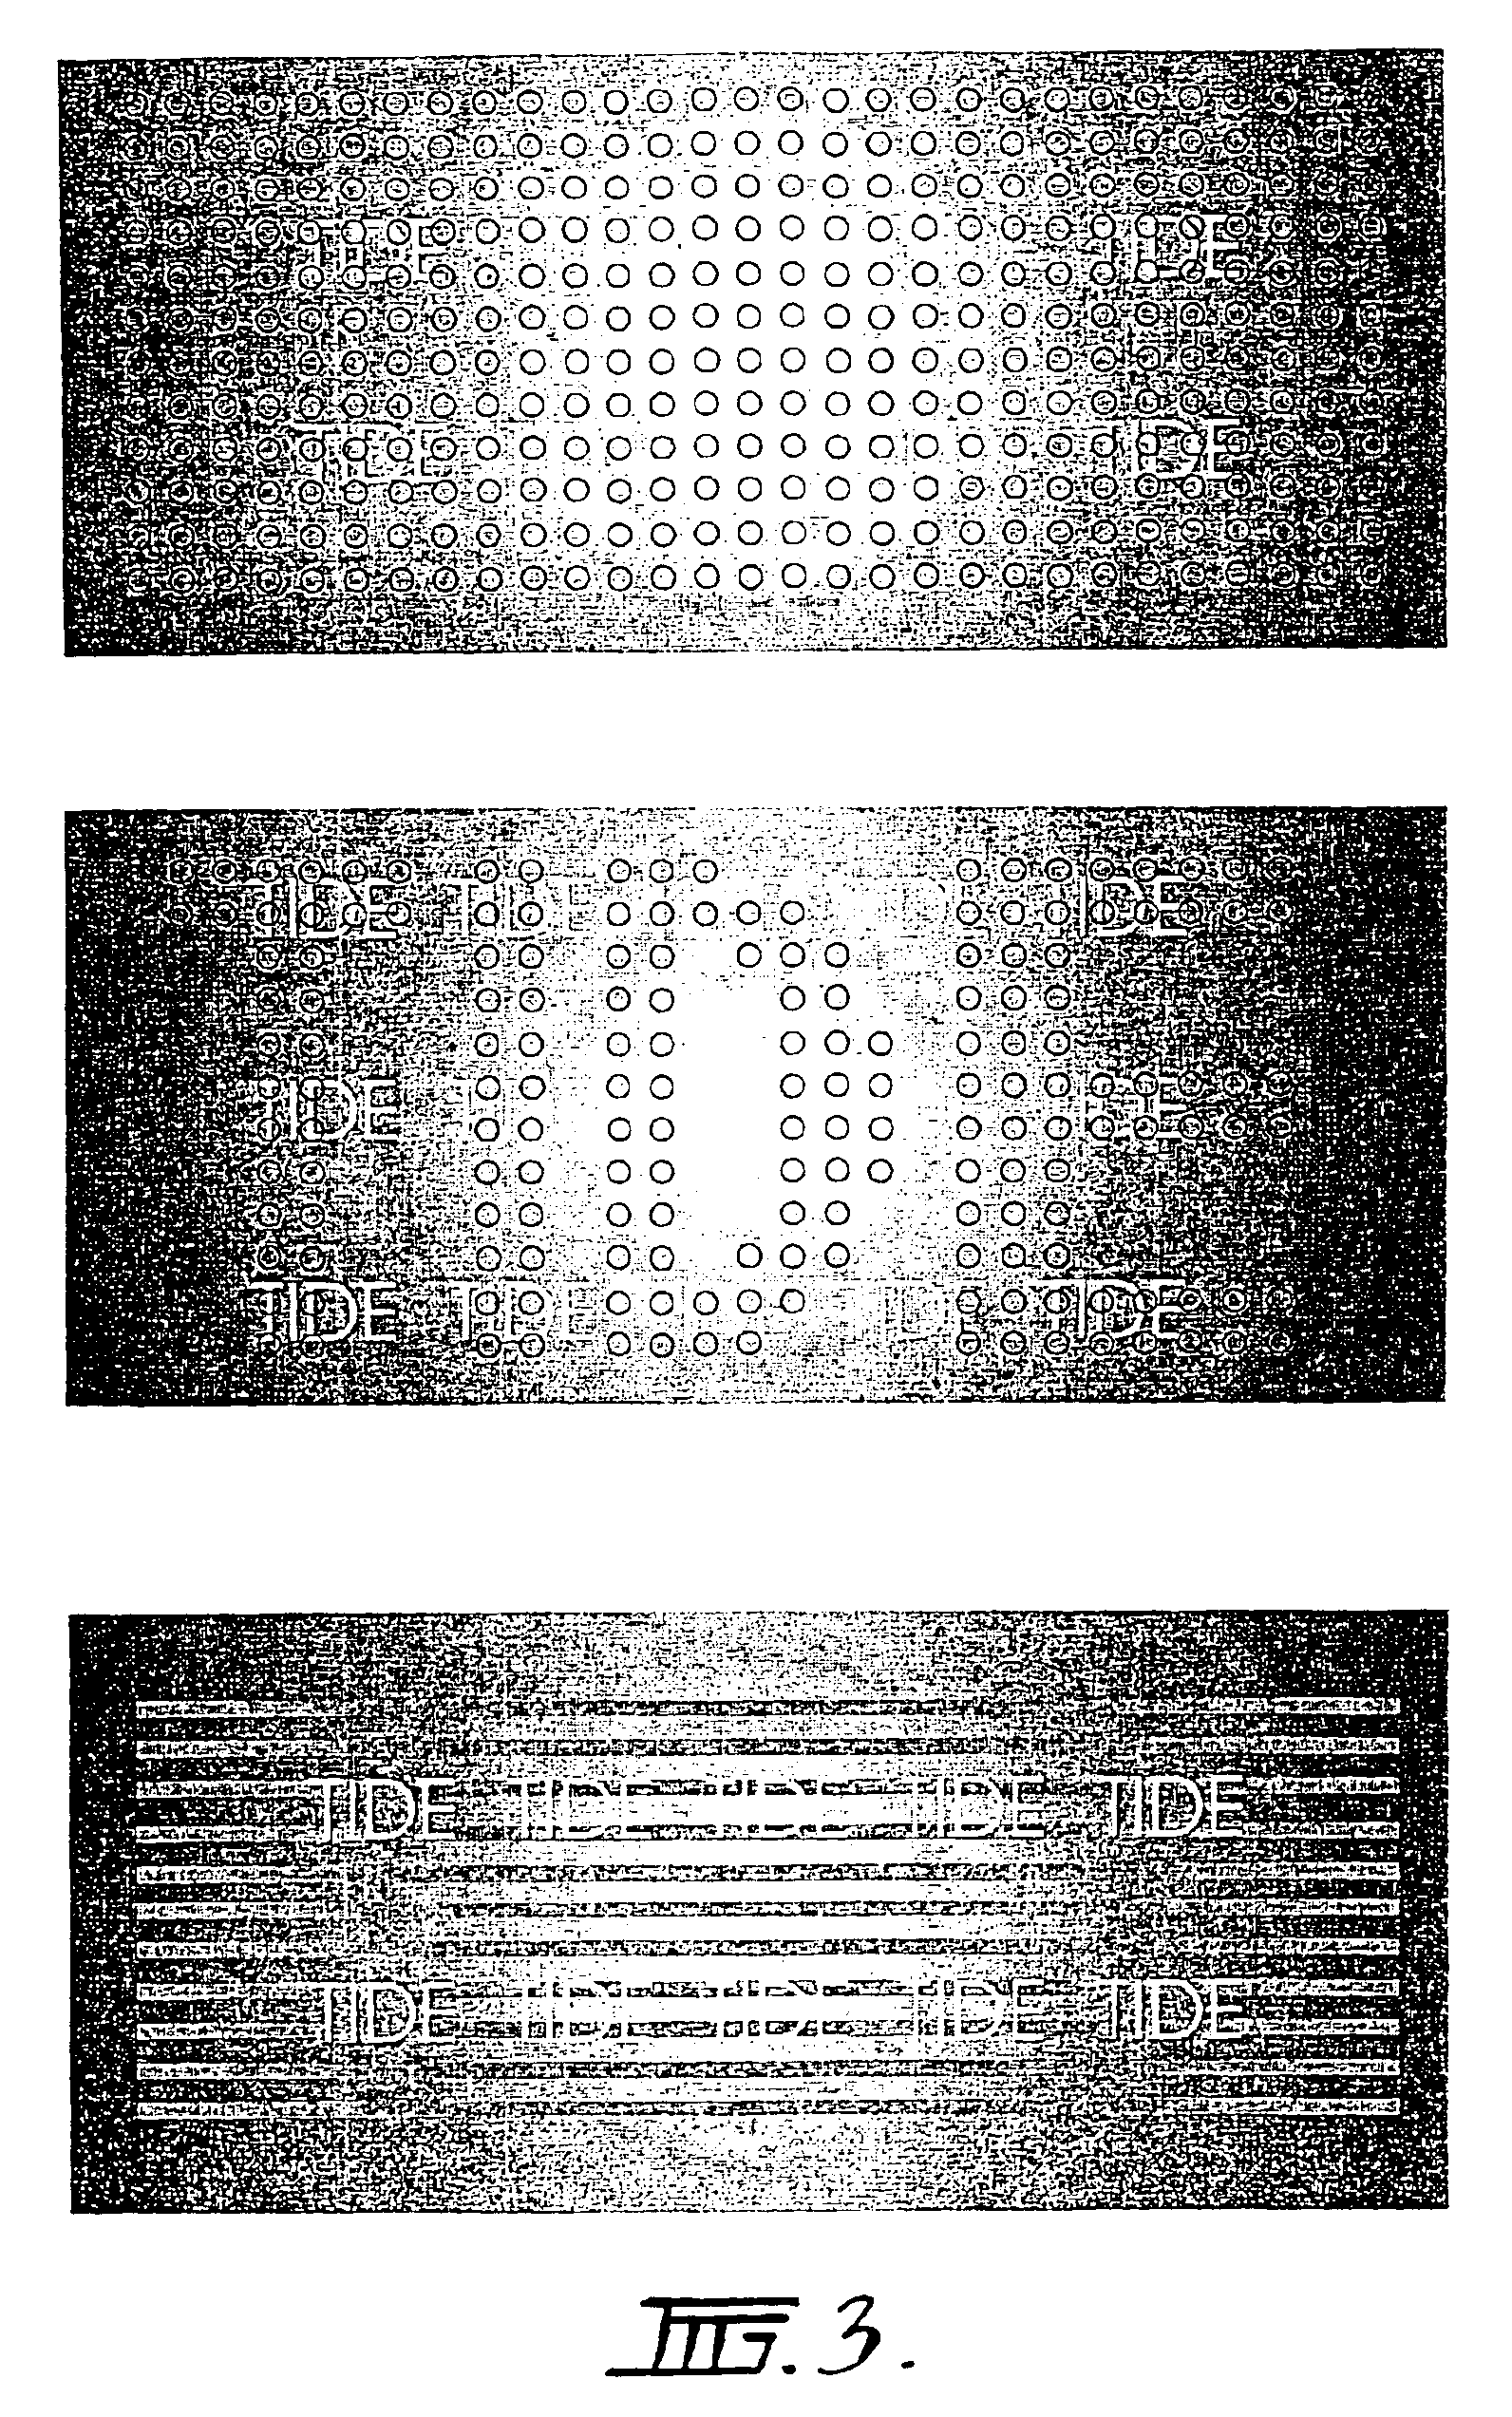 Security document with raised intaglio printed image